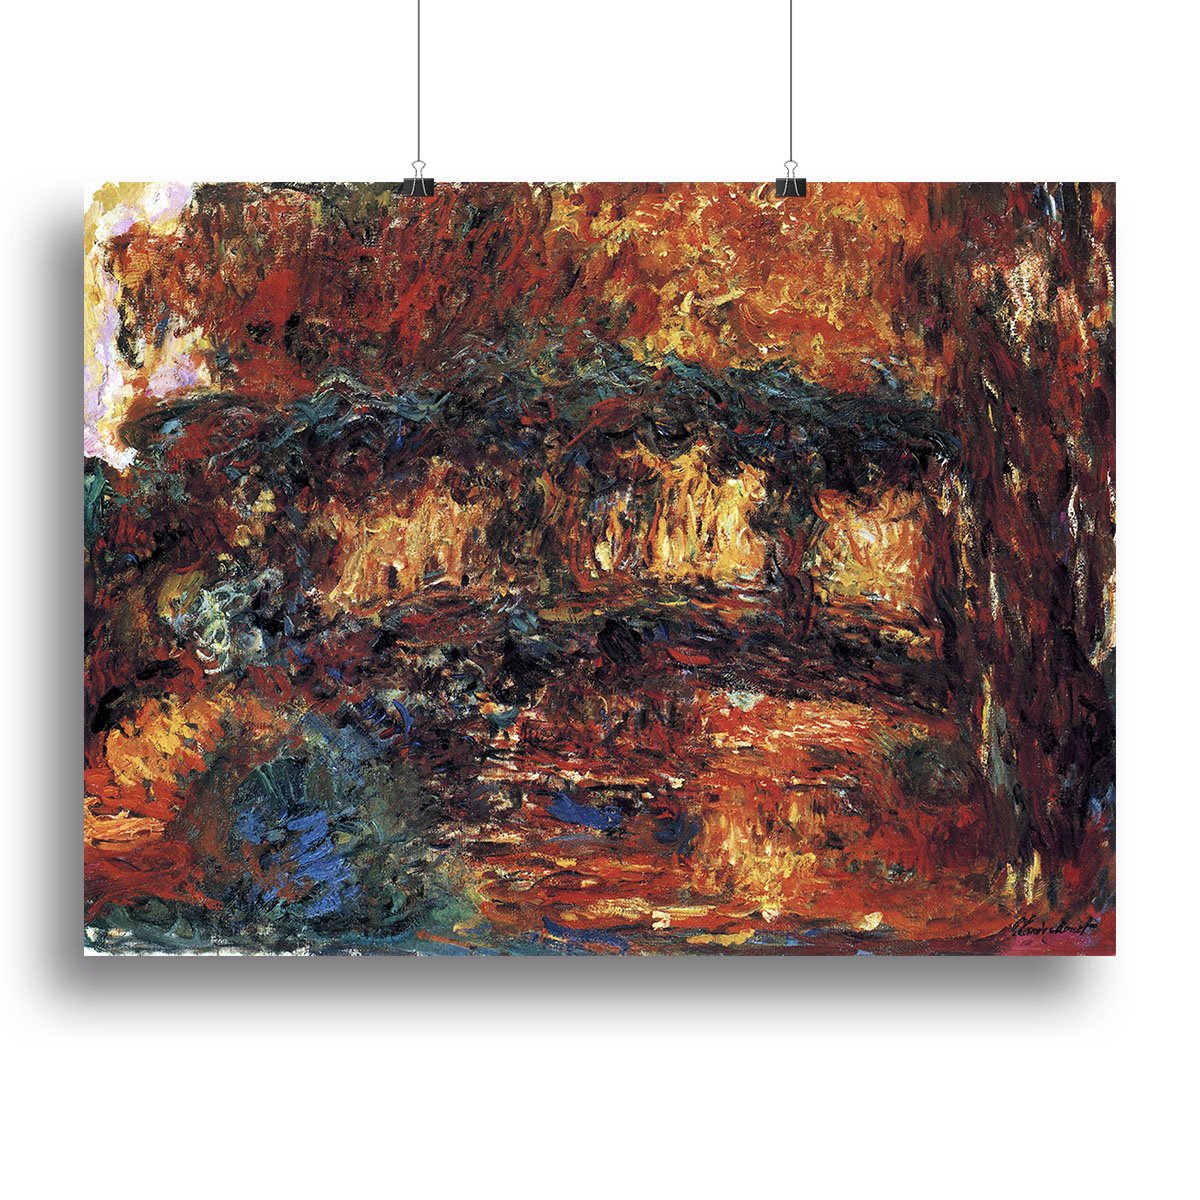 The Japanese Bridge 2 by Monet Canvas Print or Poster